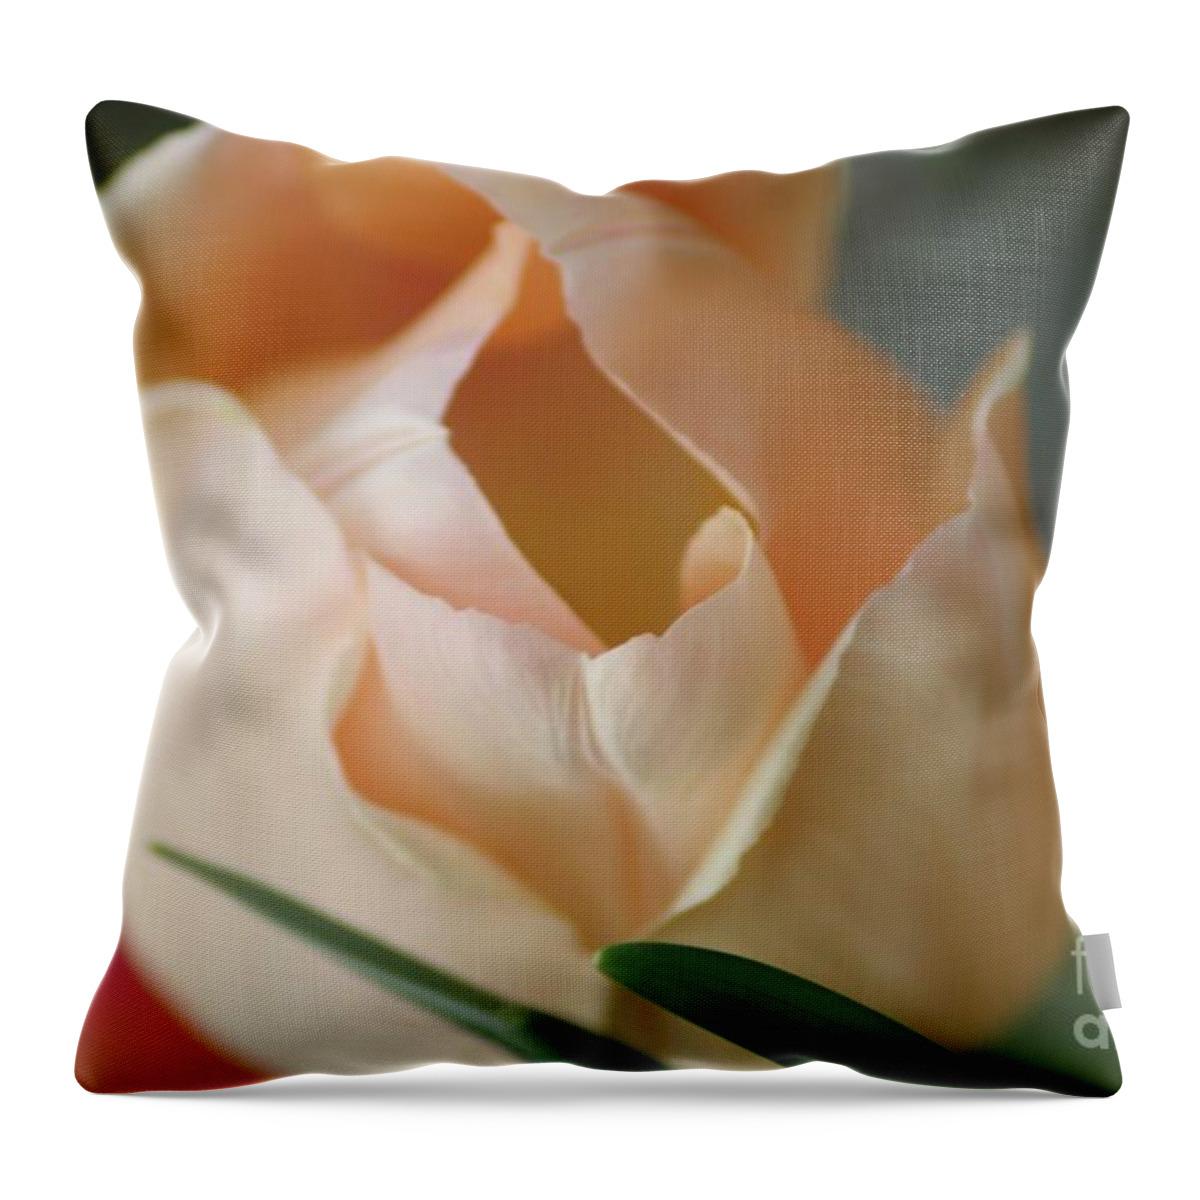 Floral Throw Pillow featuring the photograph Peach Harmony by Mary Lou Chmura